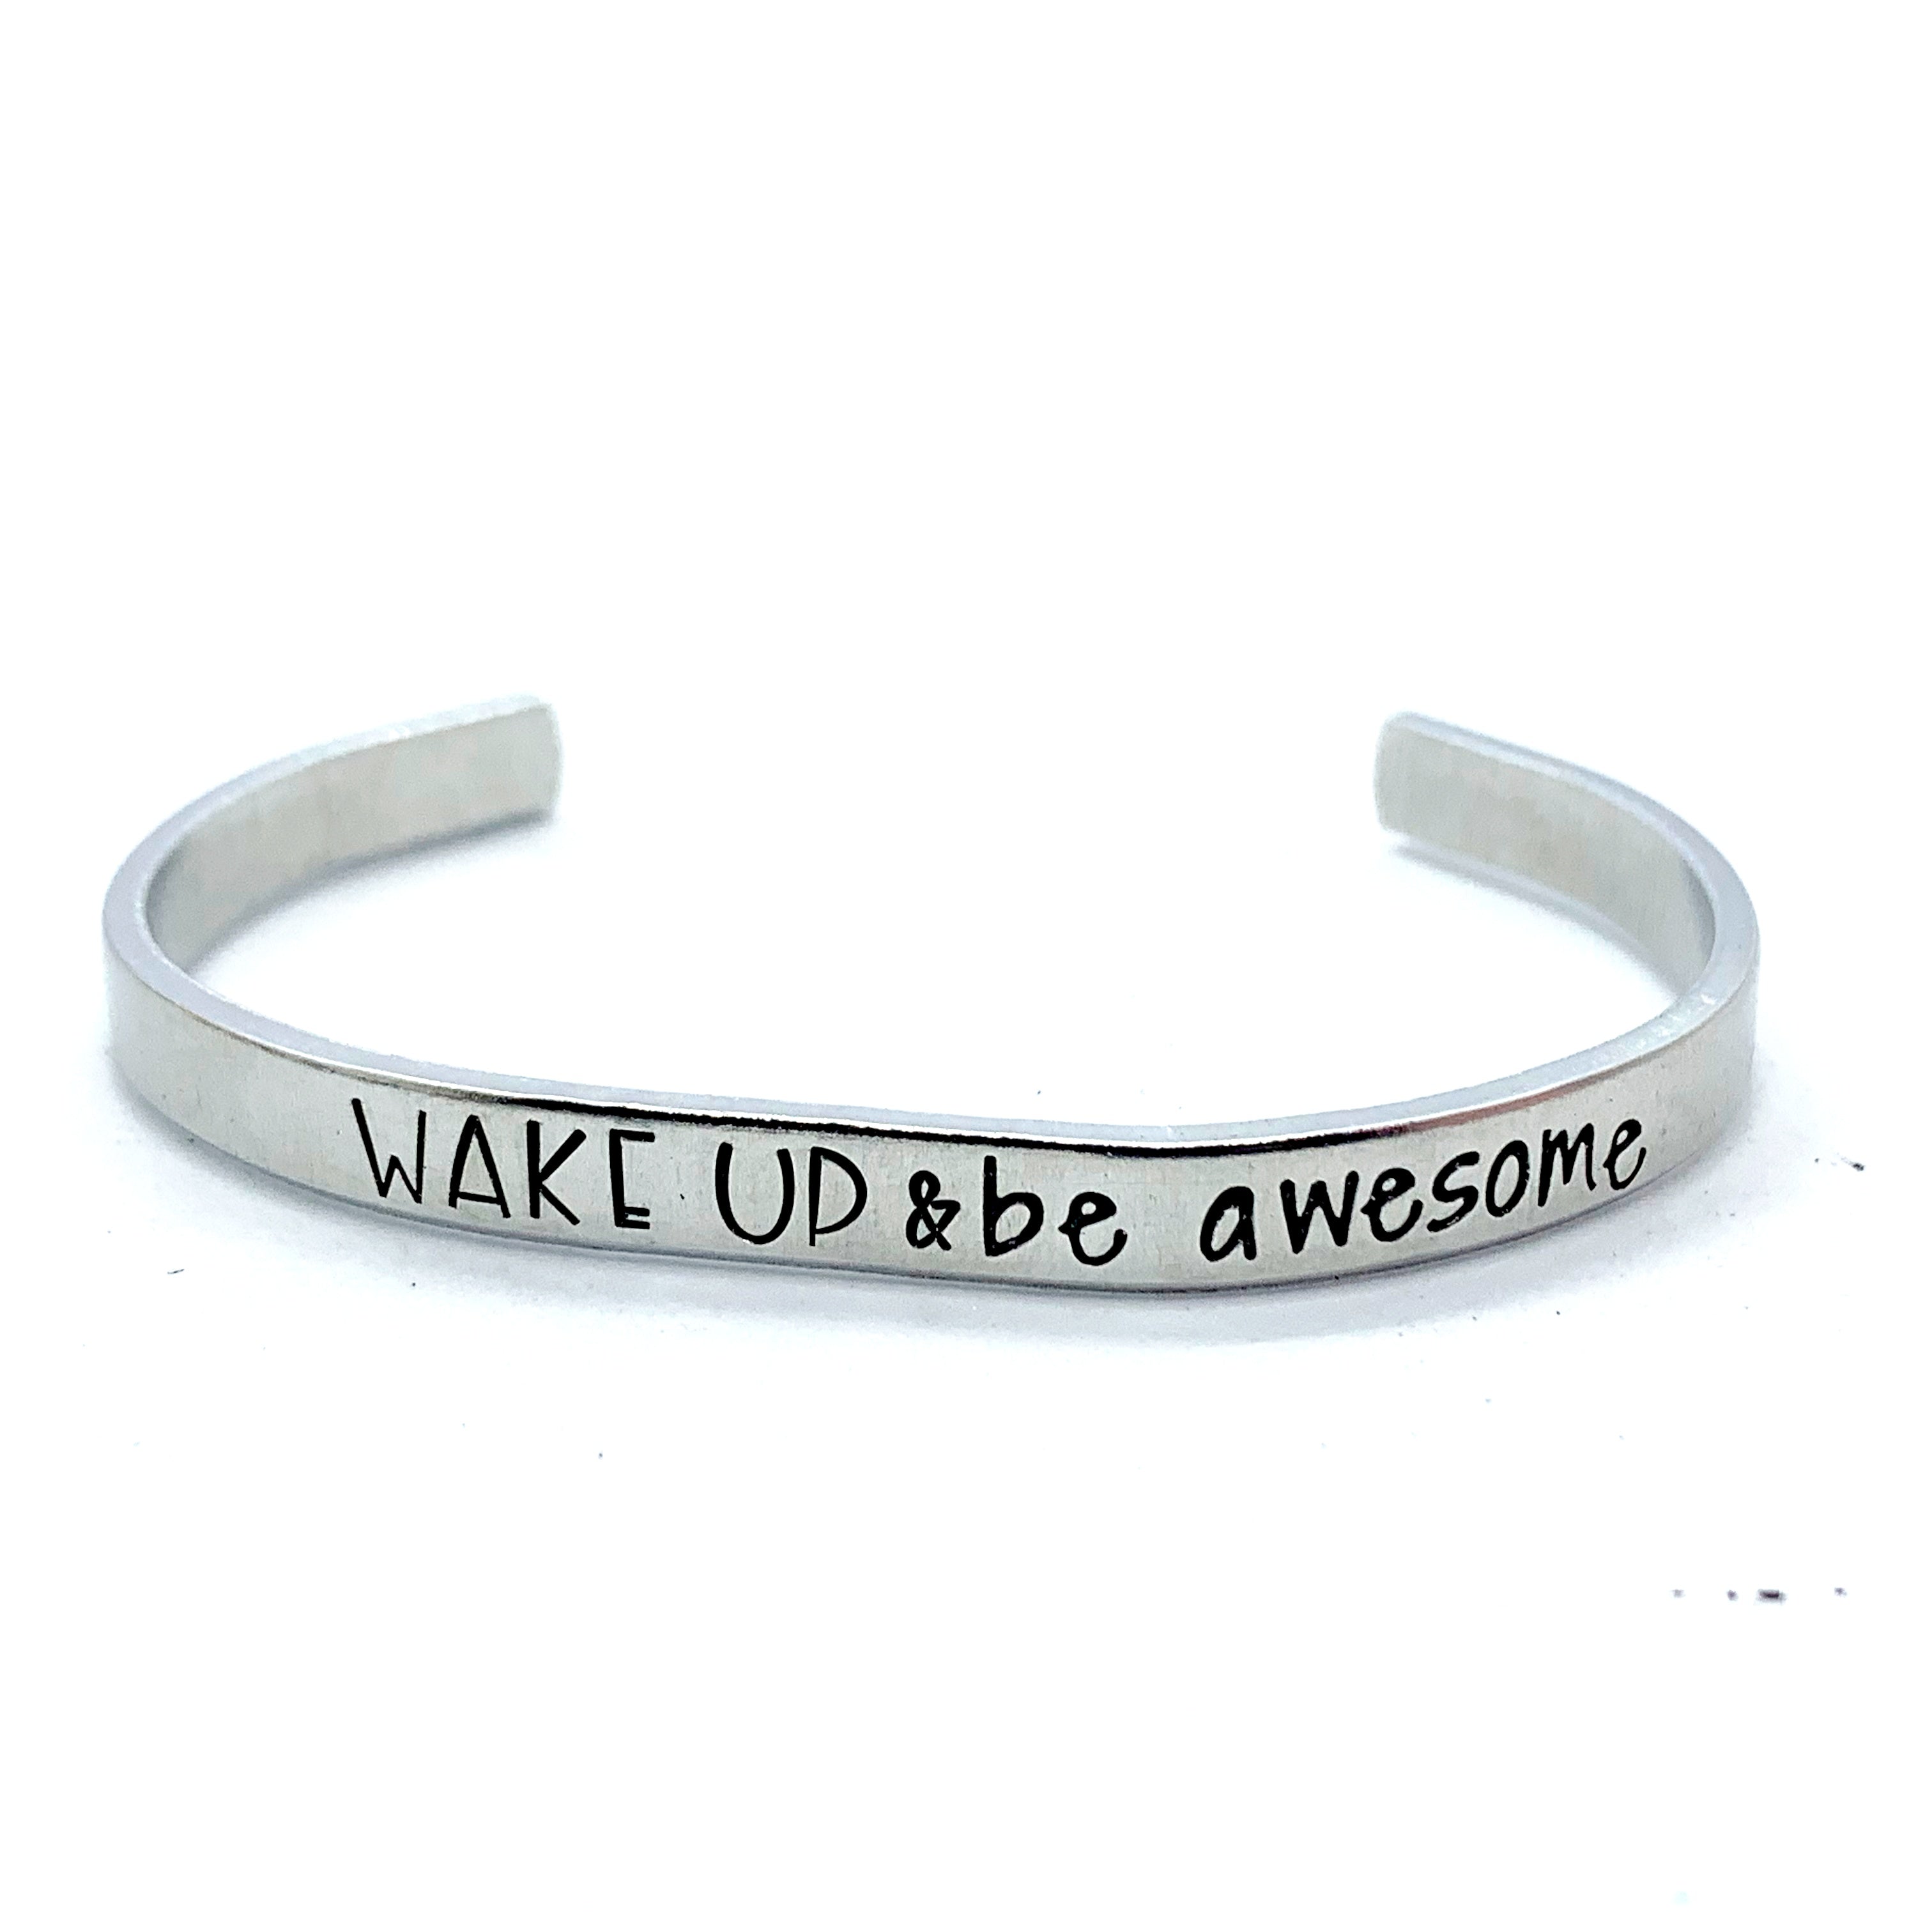 ¼ inch Aluminum Cuff - Wake Up & Be Awesome